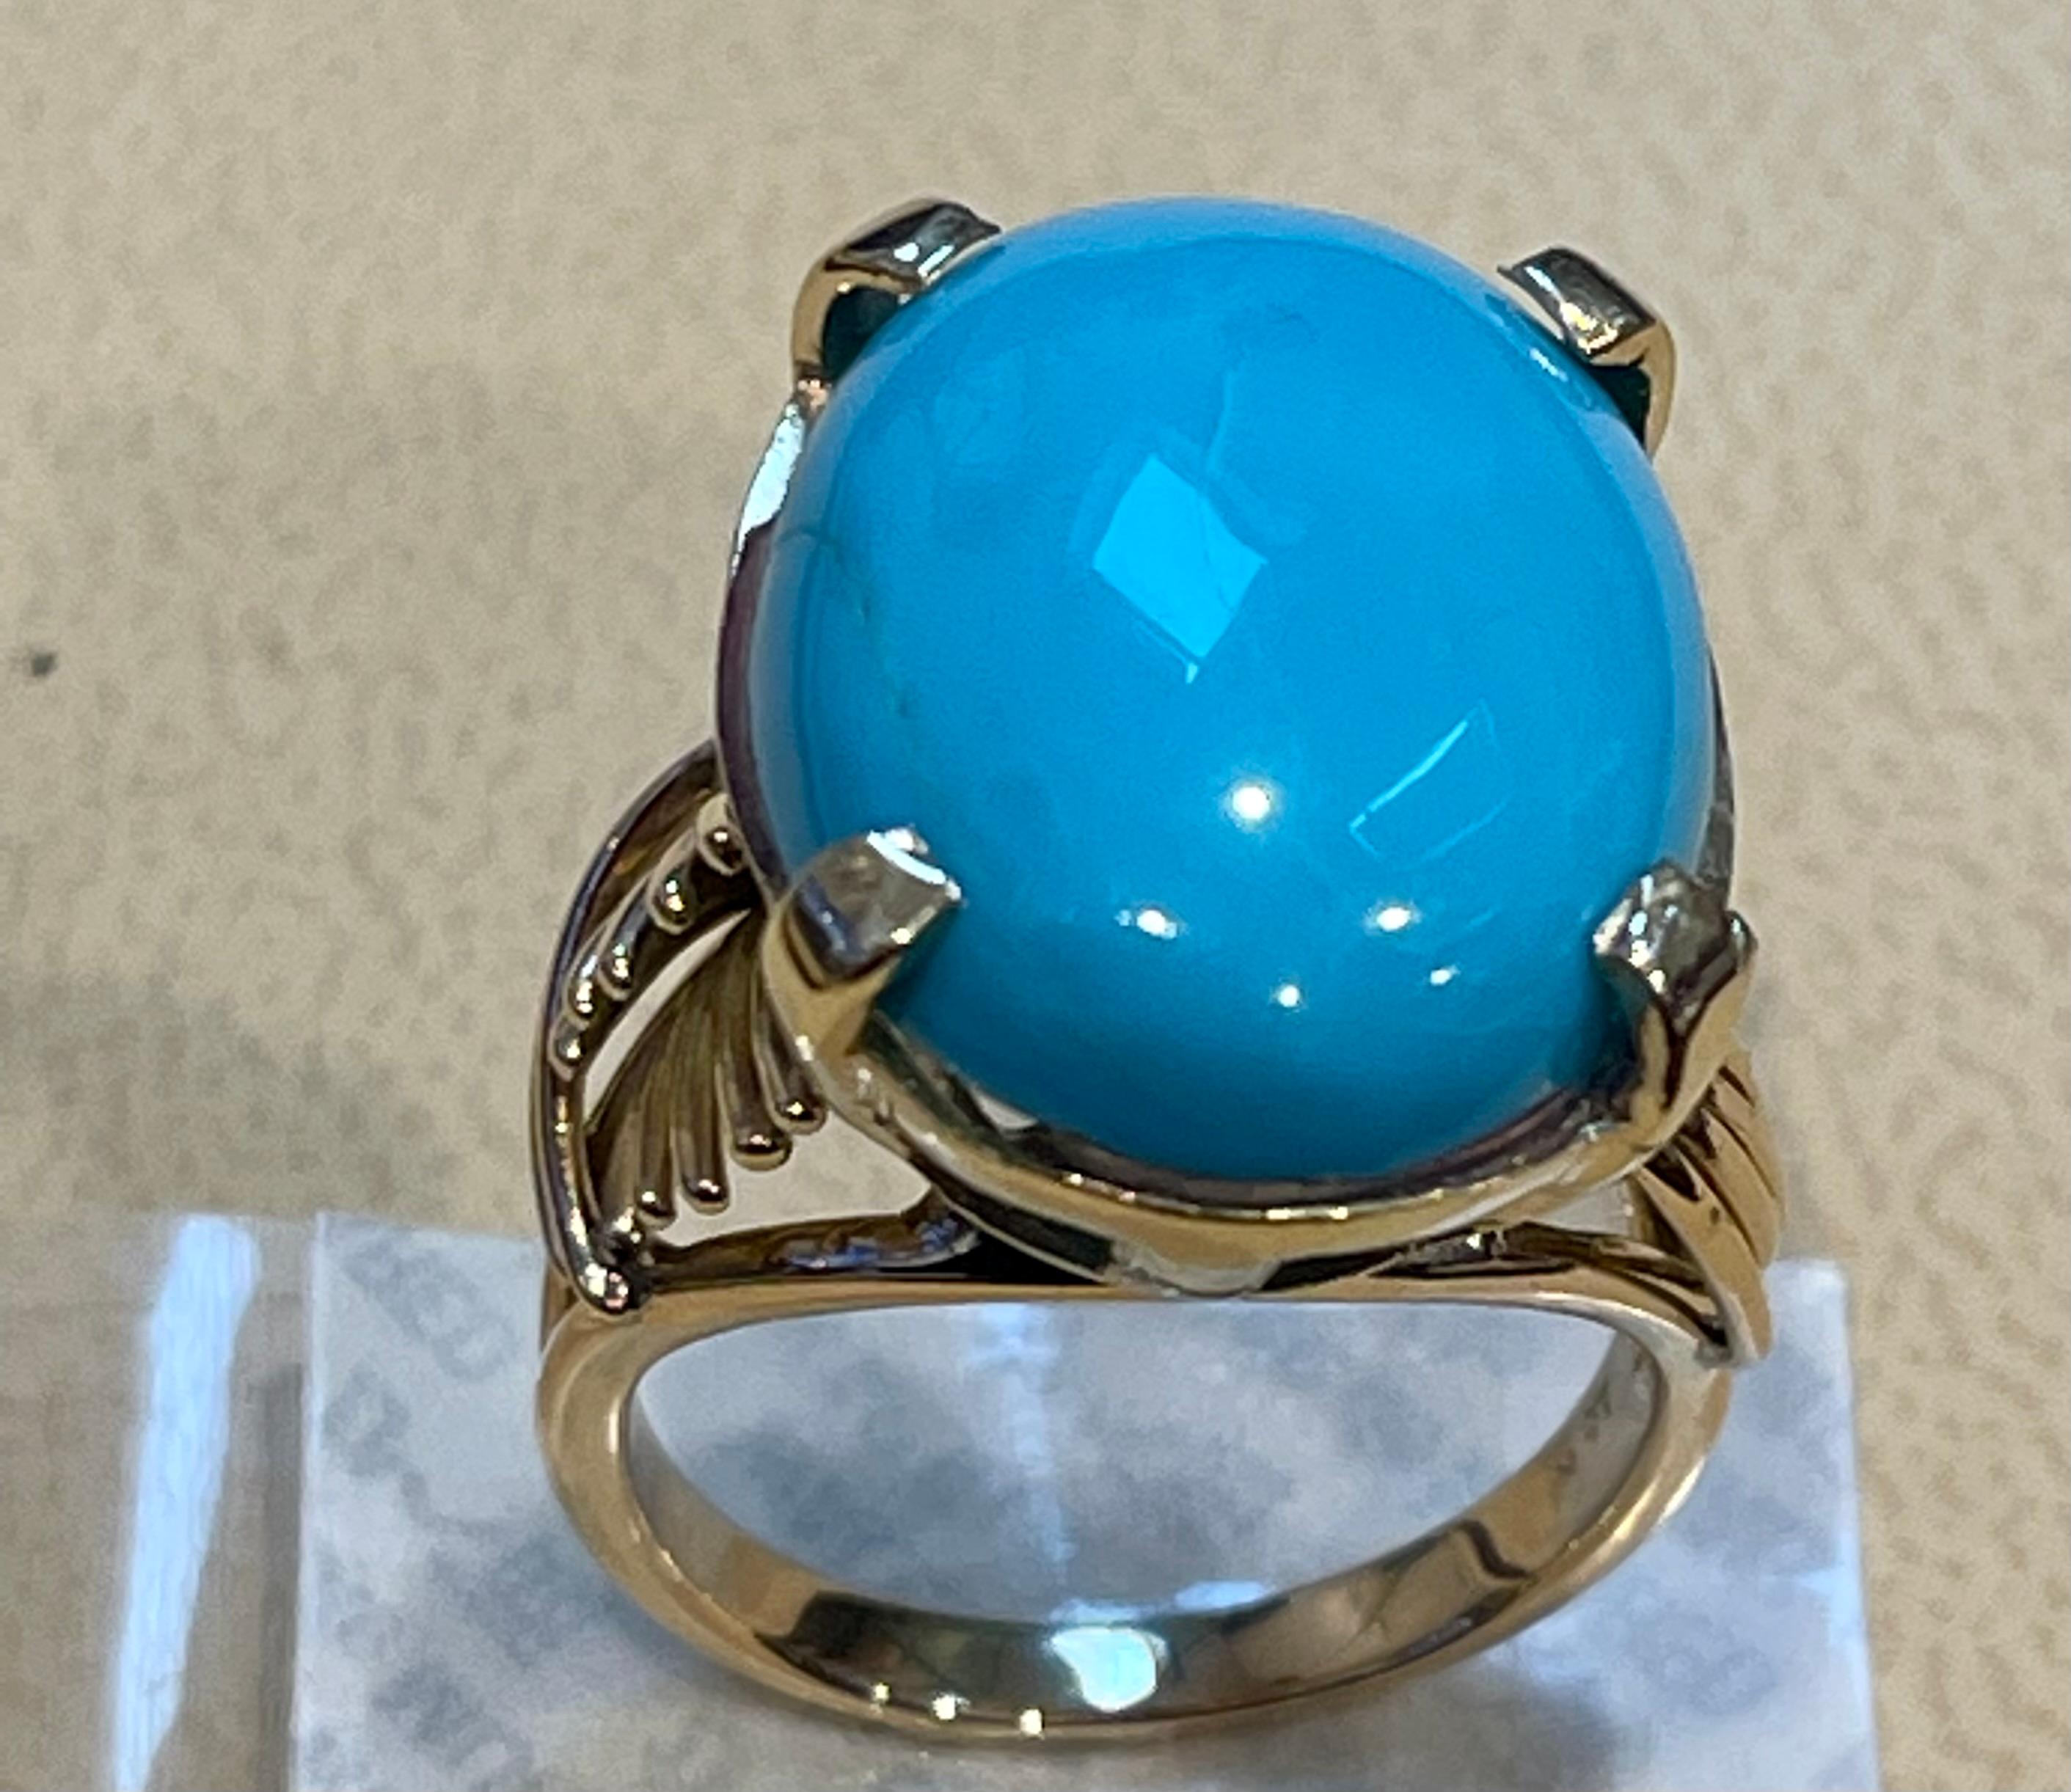 
Vintage 12 Ct Natural Oval Sleeping Beauty Turquoise Ring, 14 Kt Yellow Gold
14 karat gold 10.3 Grams 
 Natural Sleeping beauty Turquoise 
Please look at all the pictures
Ring size 6
Its very hard to capture the true color and luster of the stone,